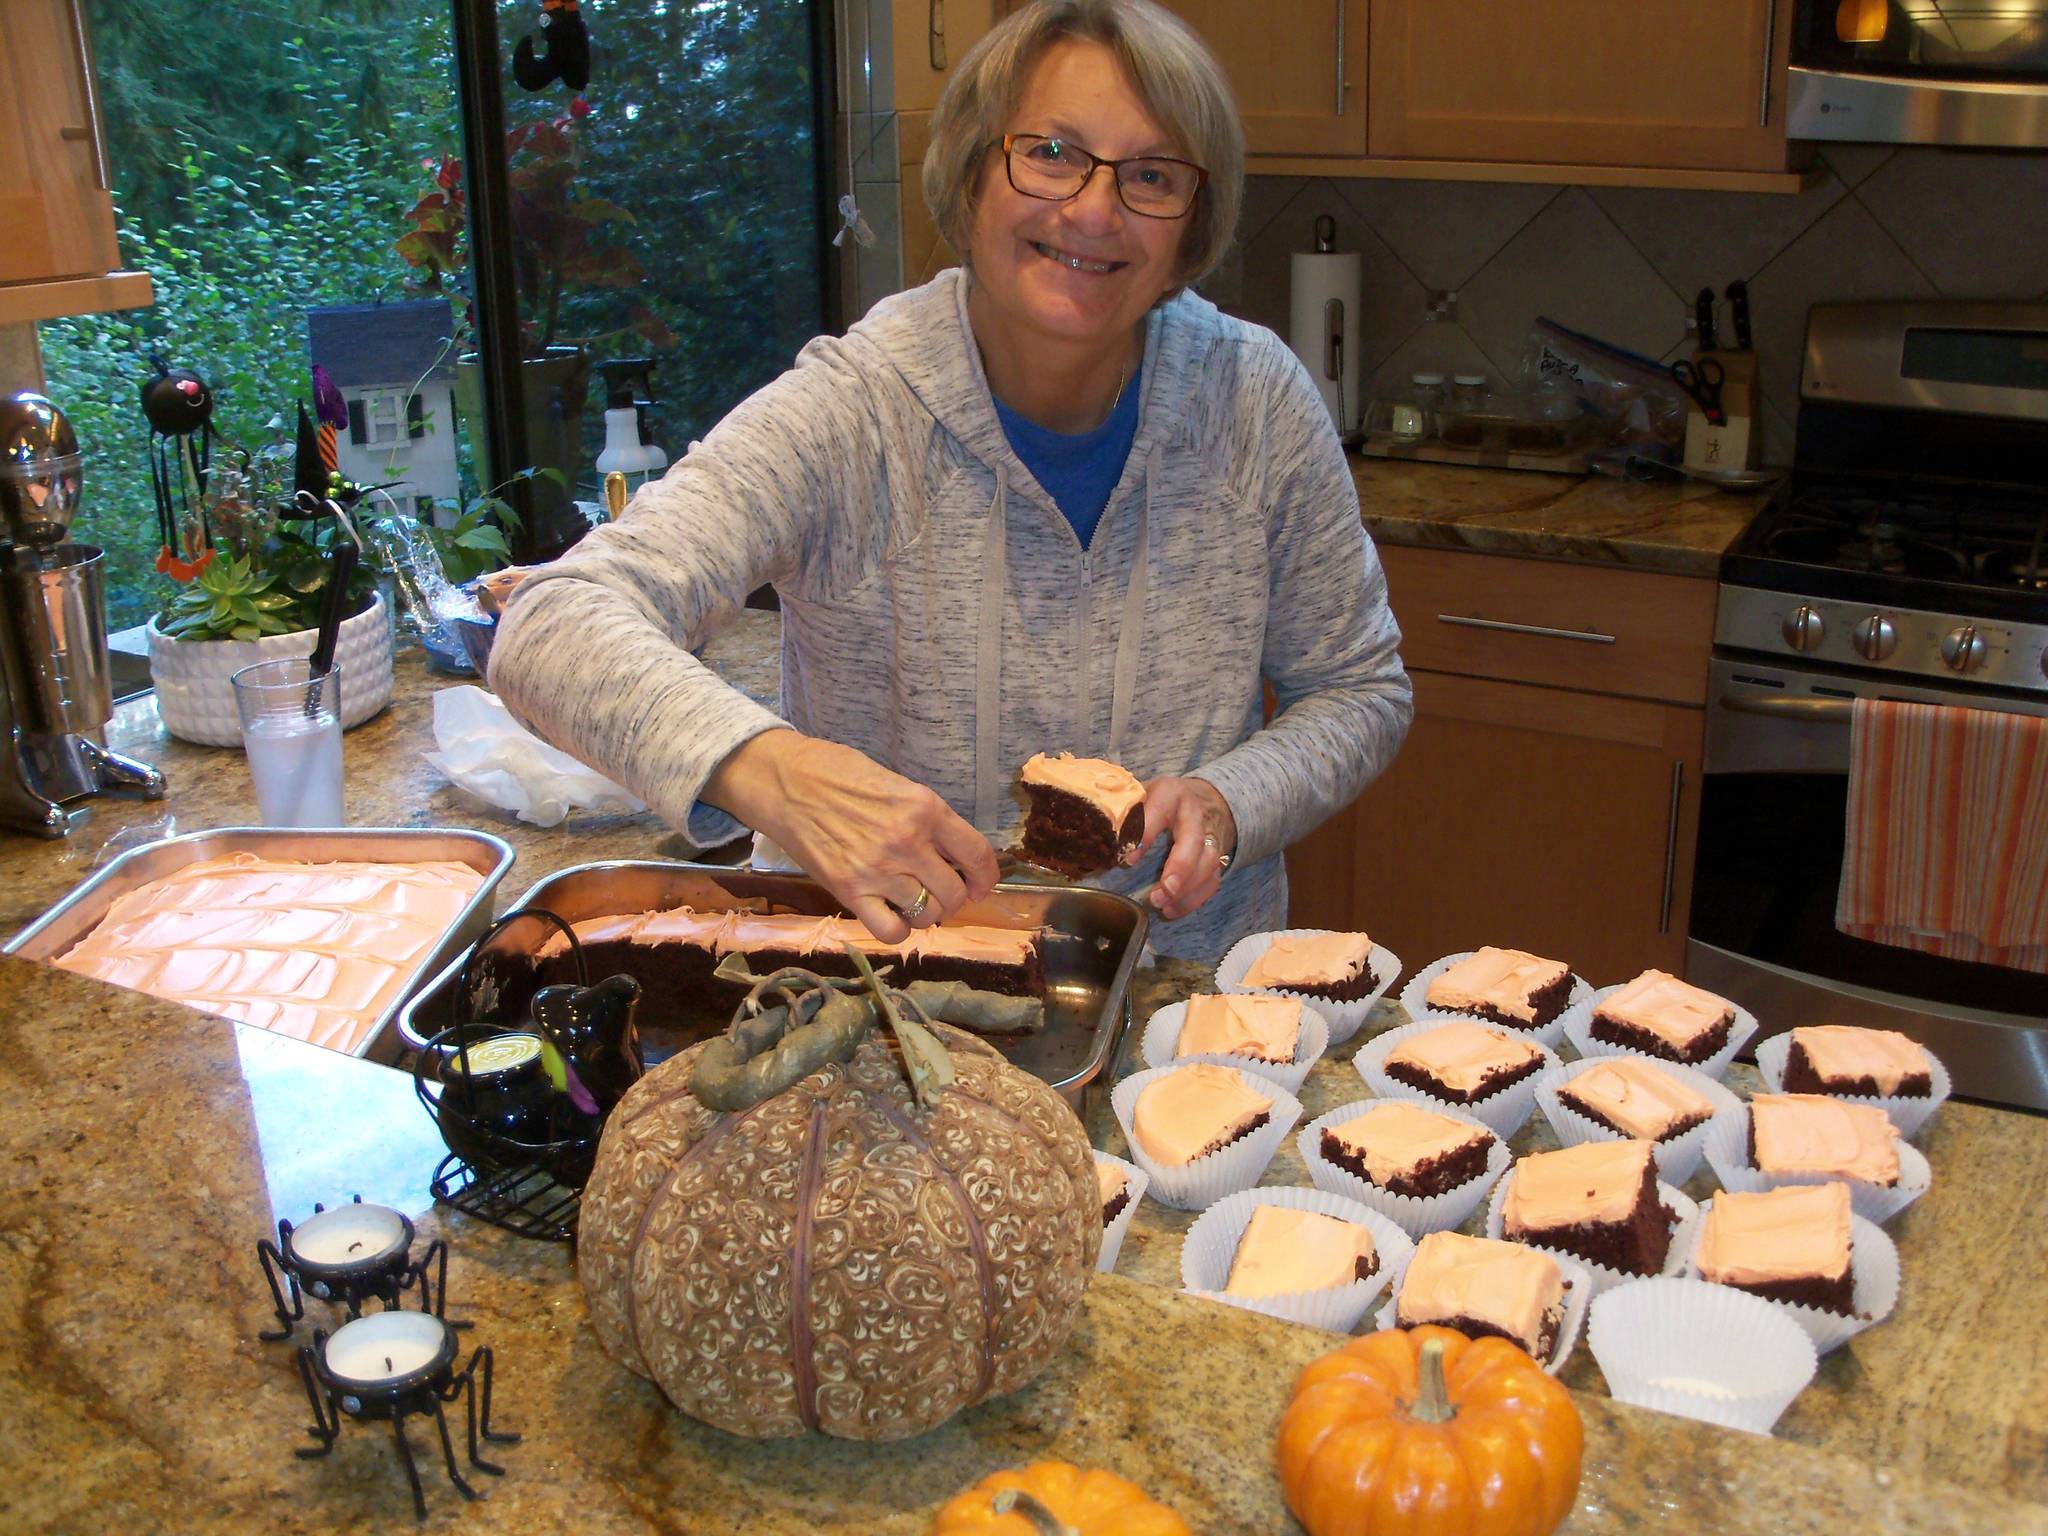 Geri Alhadeff bakes desserts for the homeless of Seattle in her Mercer Island kitchen. Photo courtesy of Jack Alhadeff